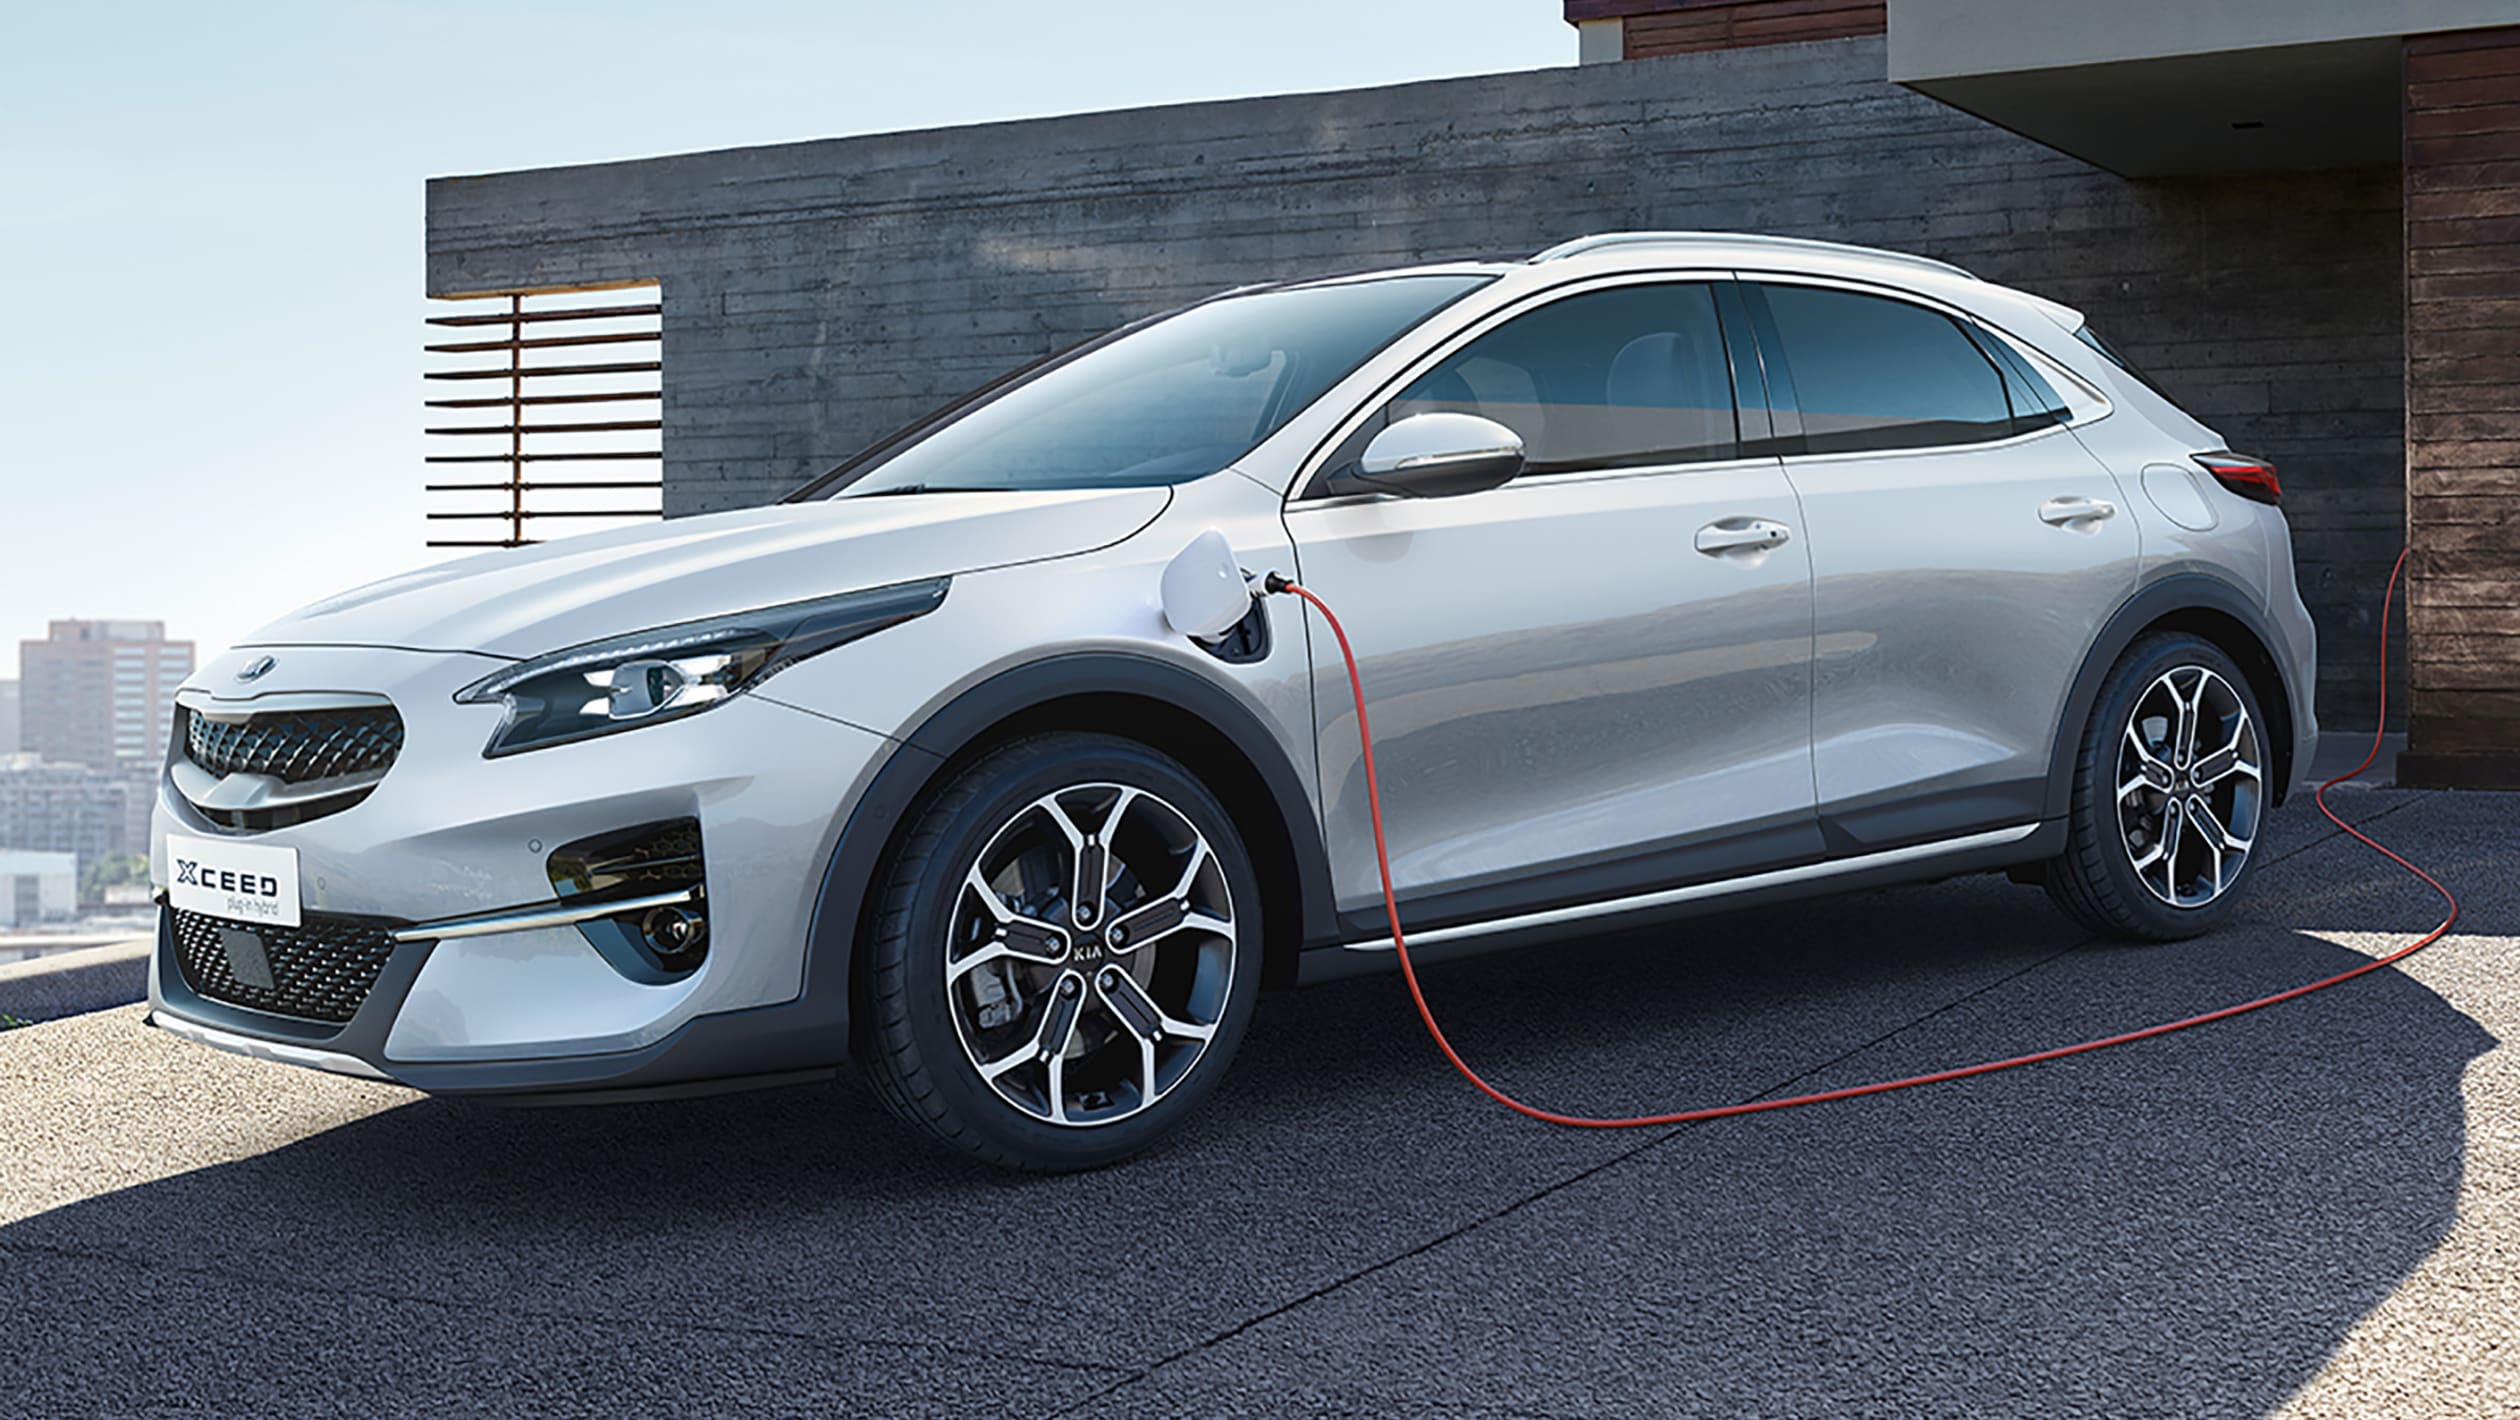 New 2020 Kia XCeed PHEV: prices, specs and release date 